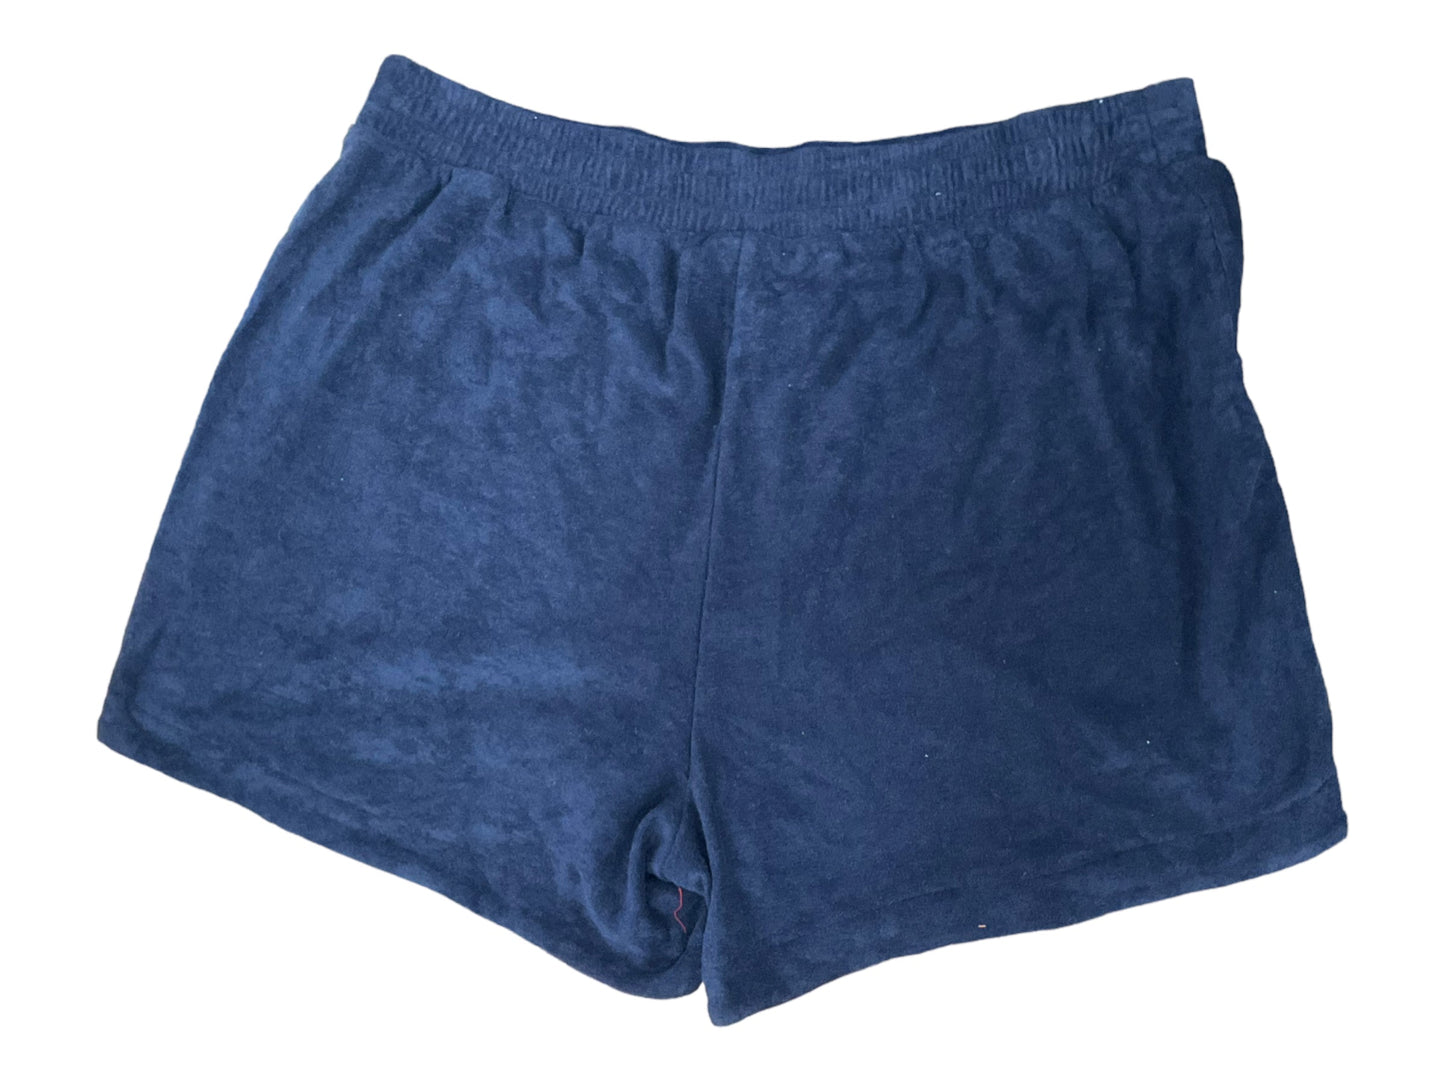 Shorts By A New Day  Size: 1x